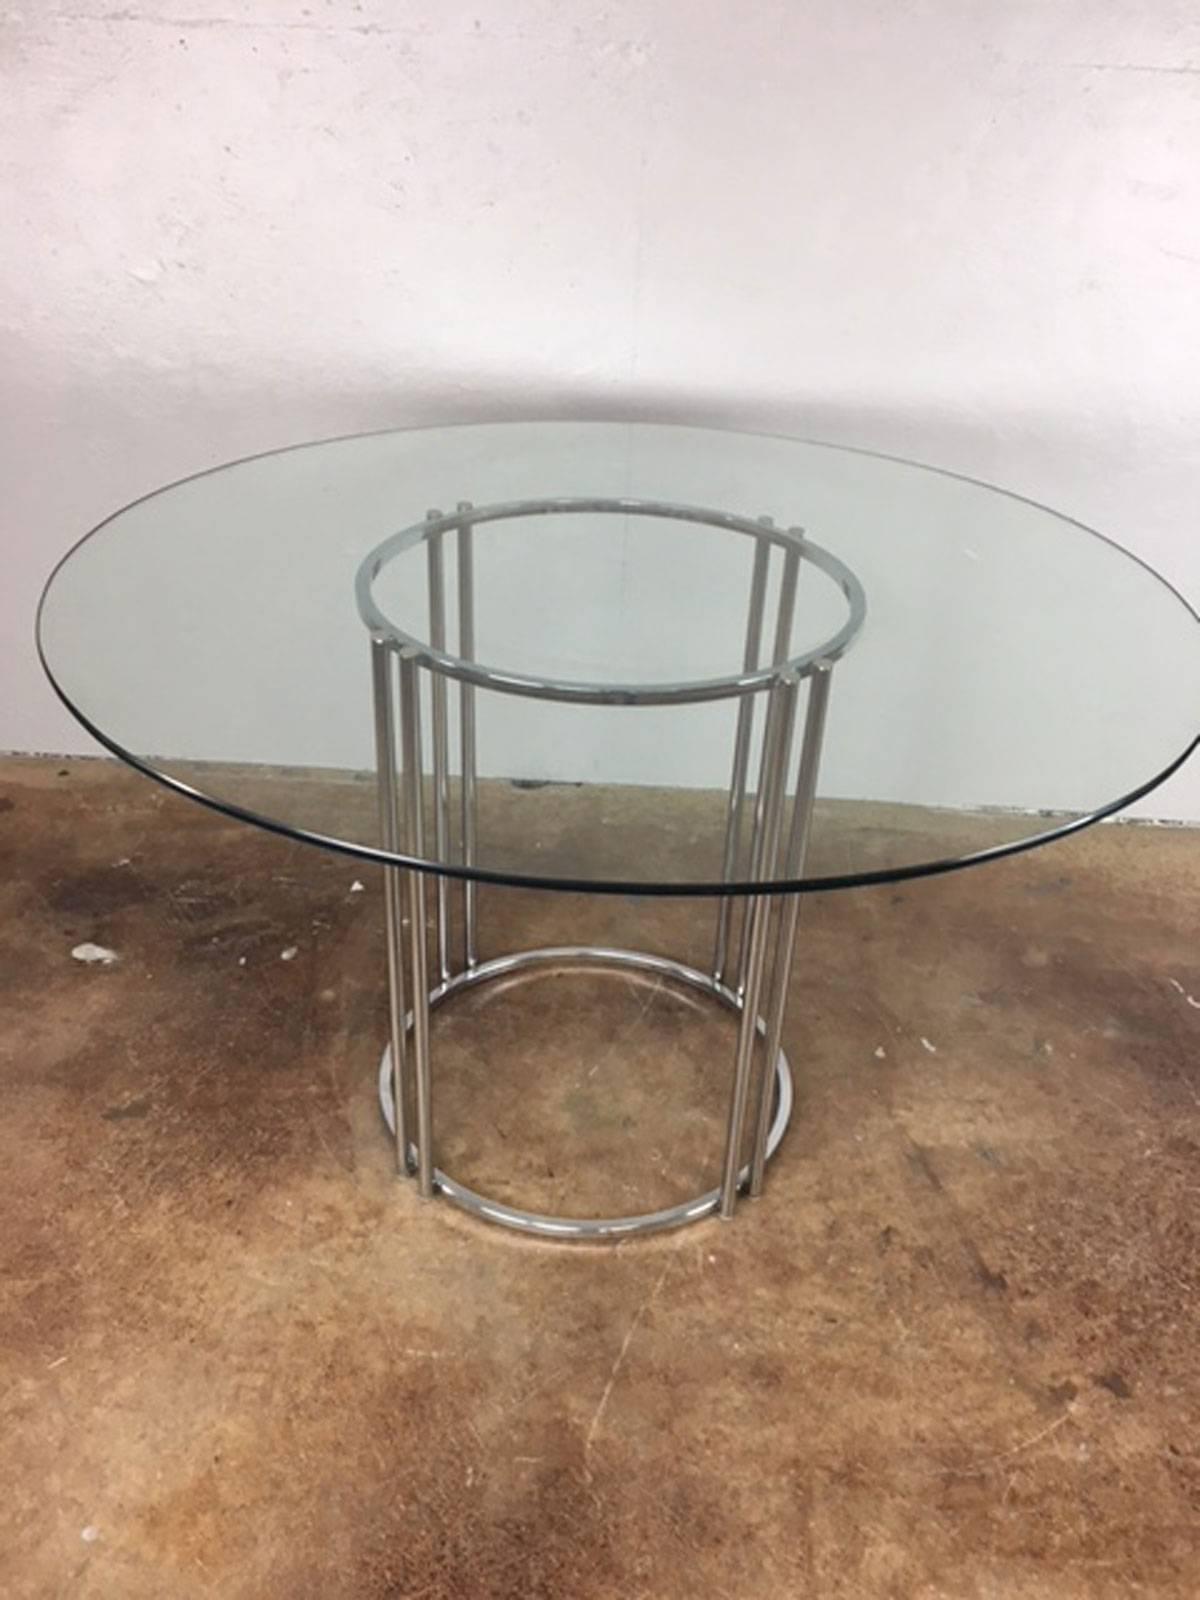 Authentic Milo Baughman chrome double tube support base dining table with glass top. Chrome and glass are in excellent condition. 48